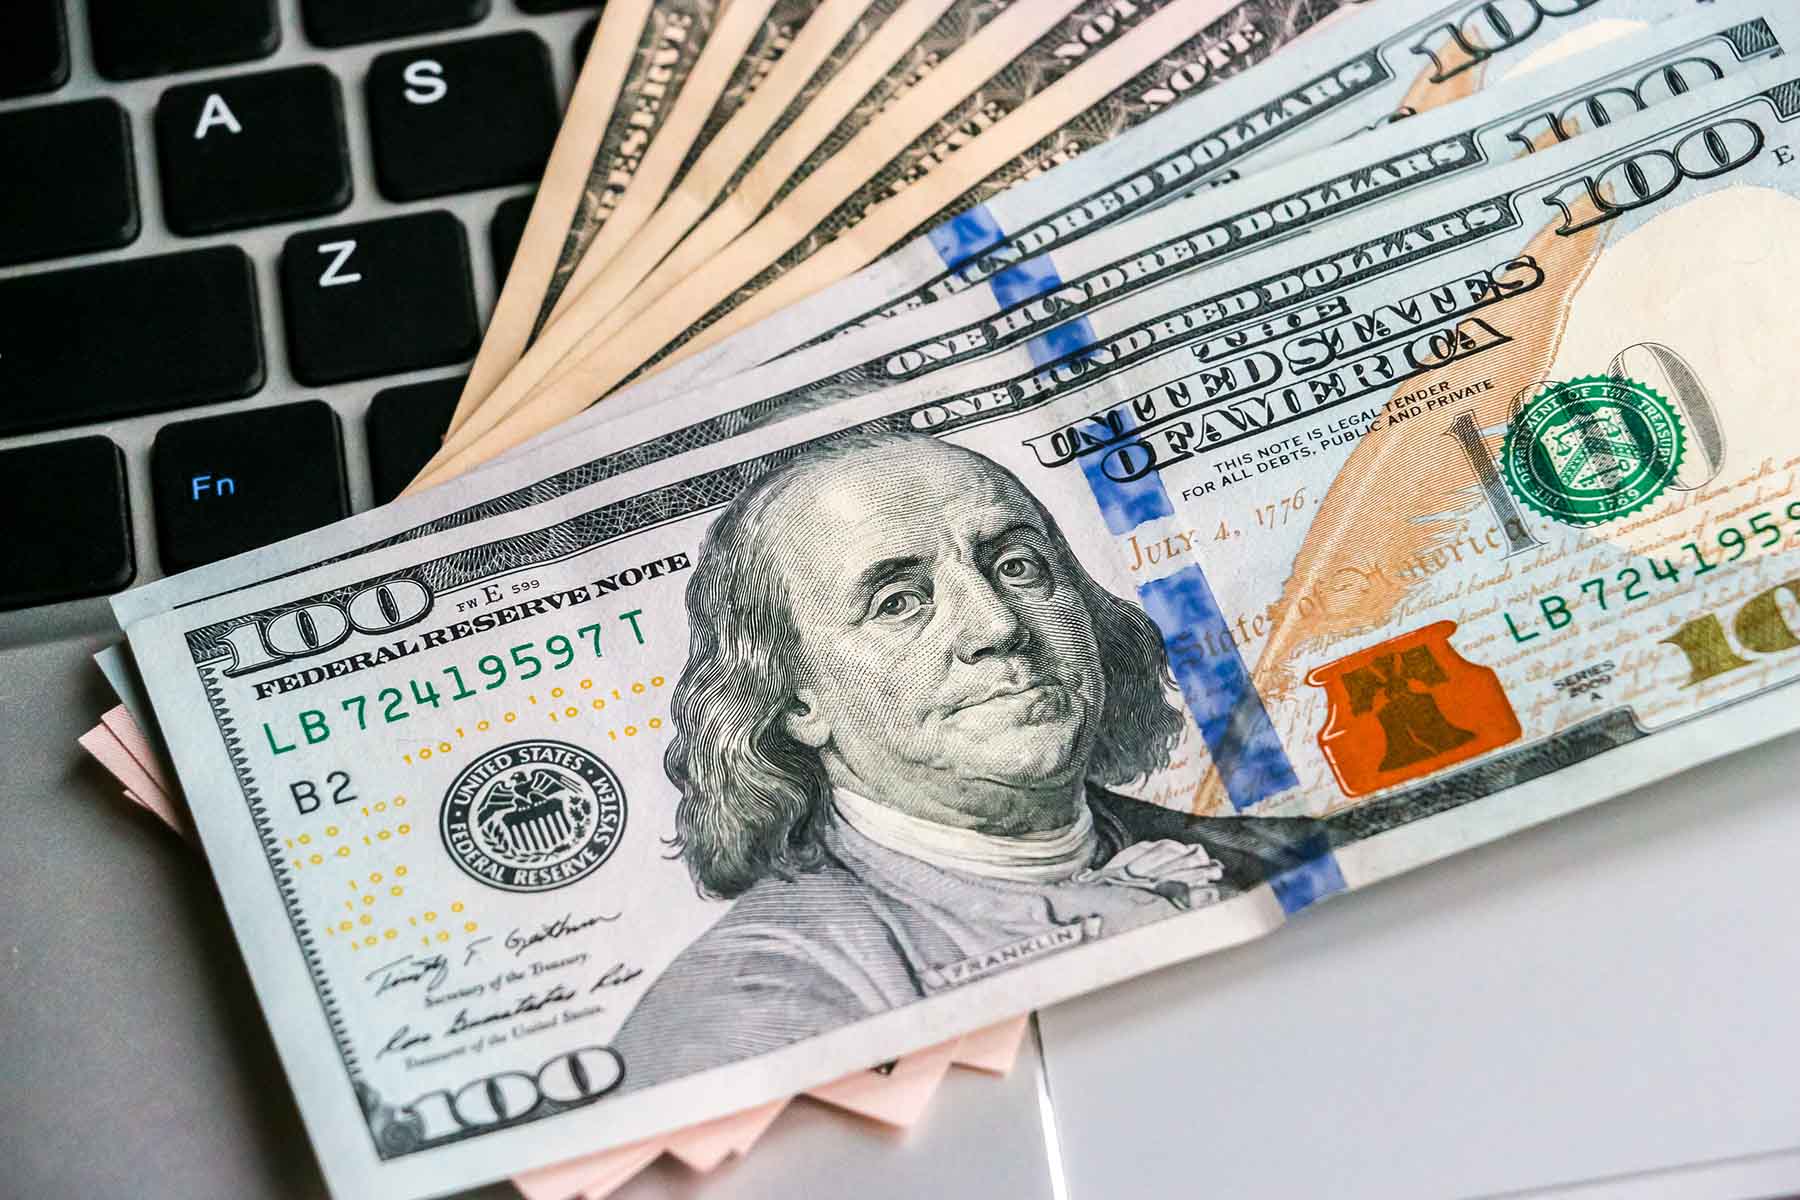 A stack of cash on top of a laptop keyboard.